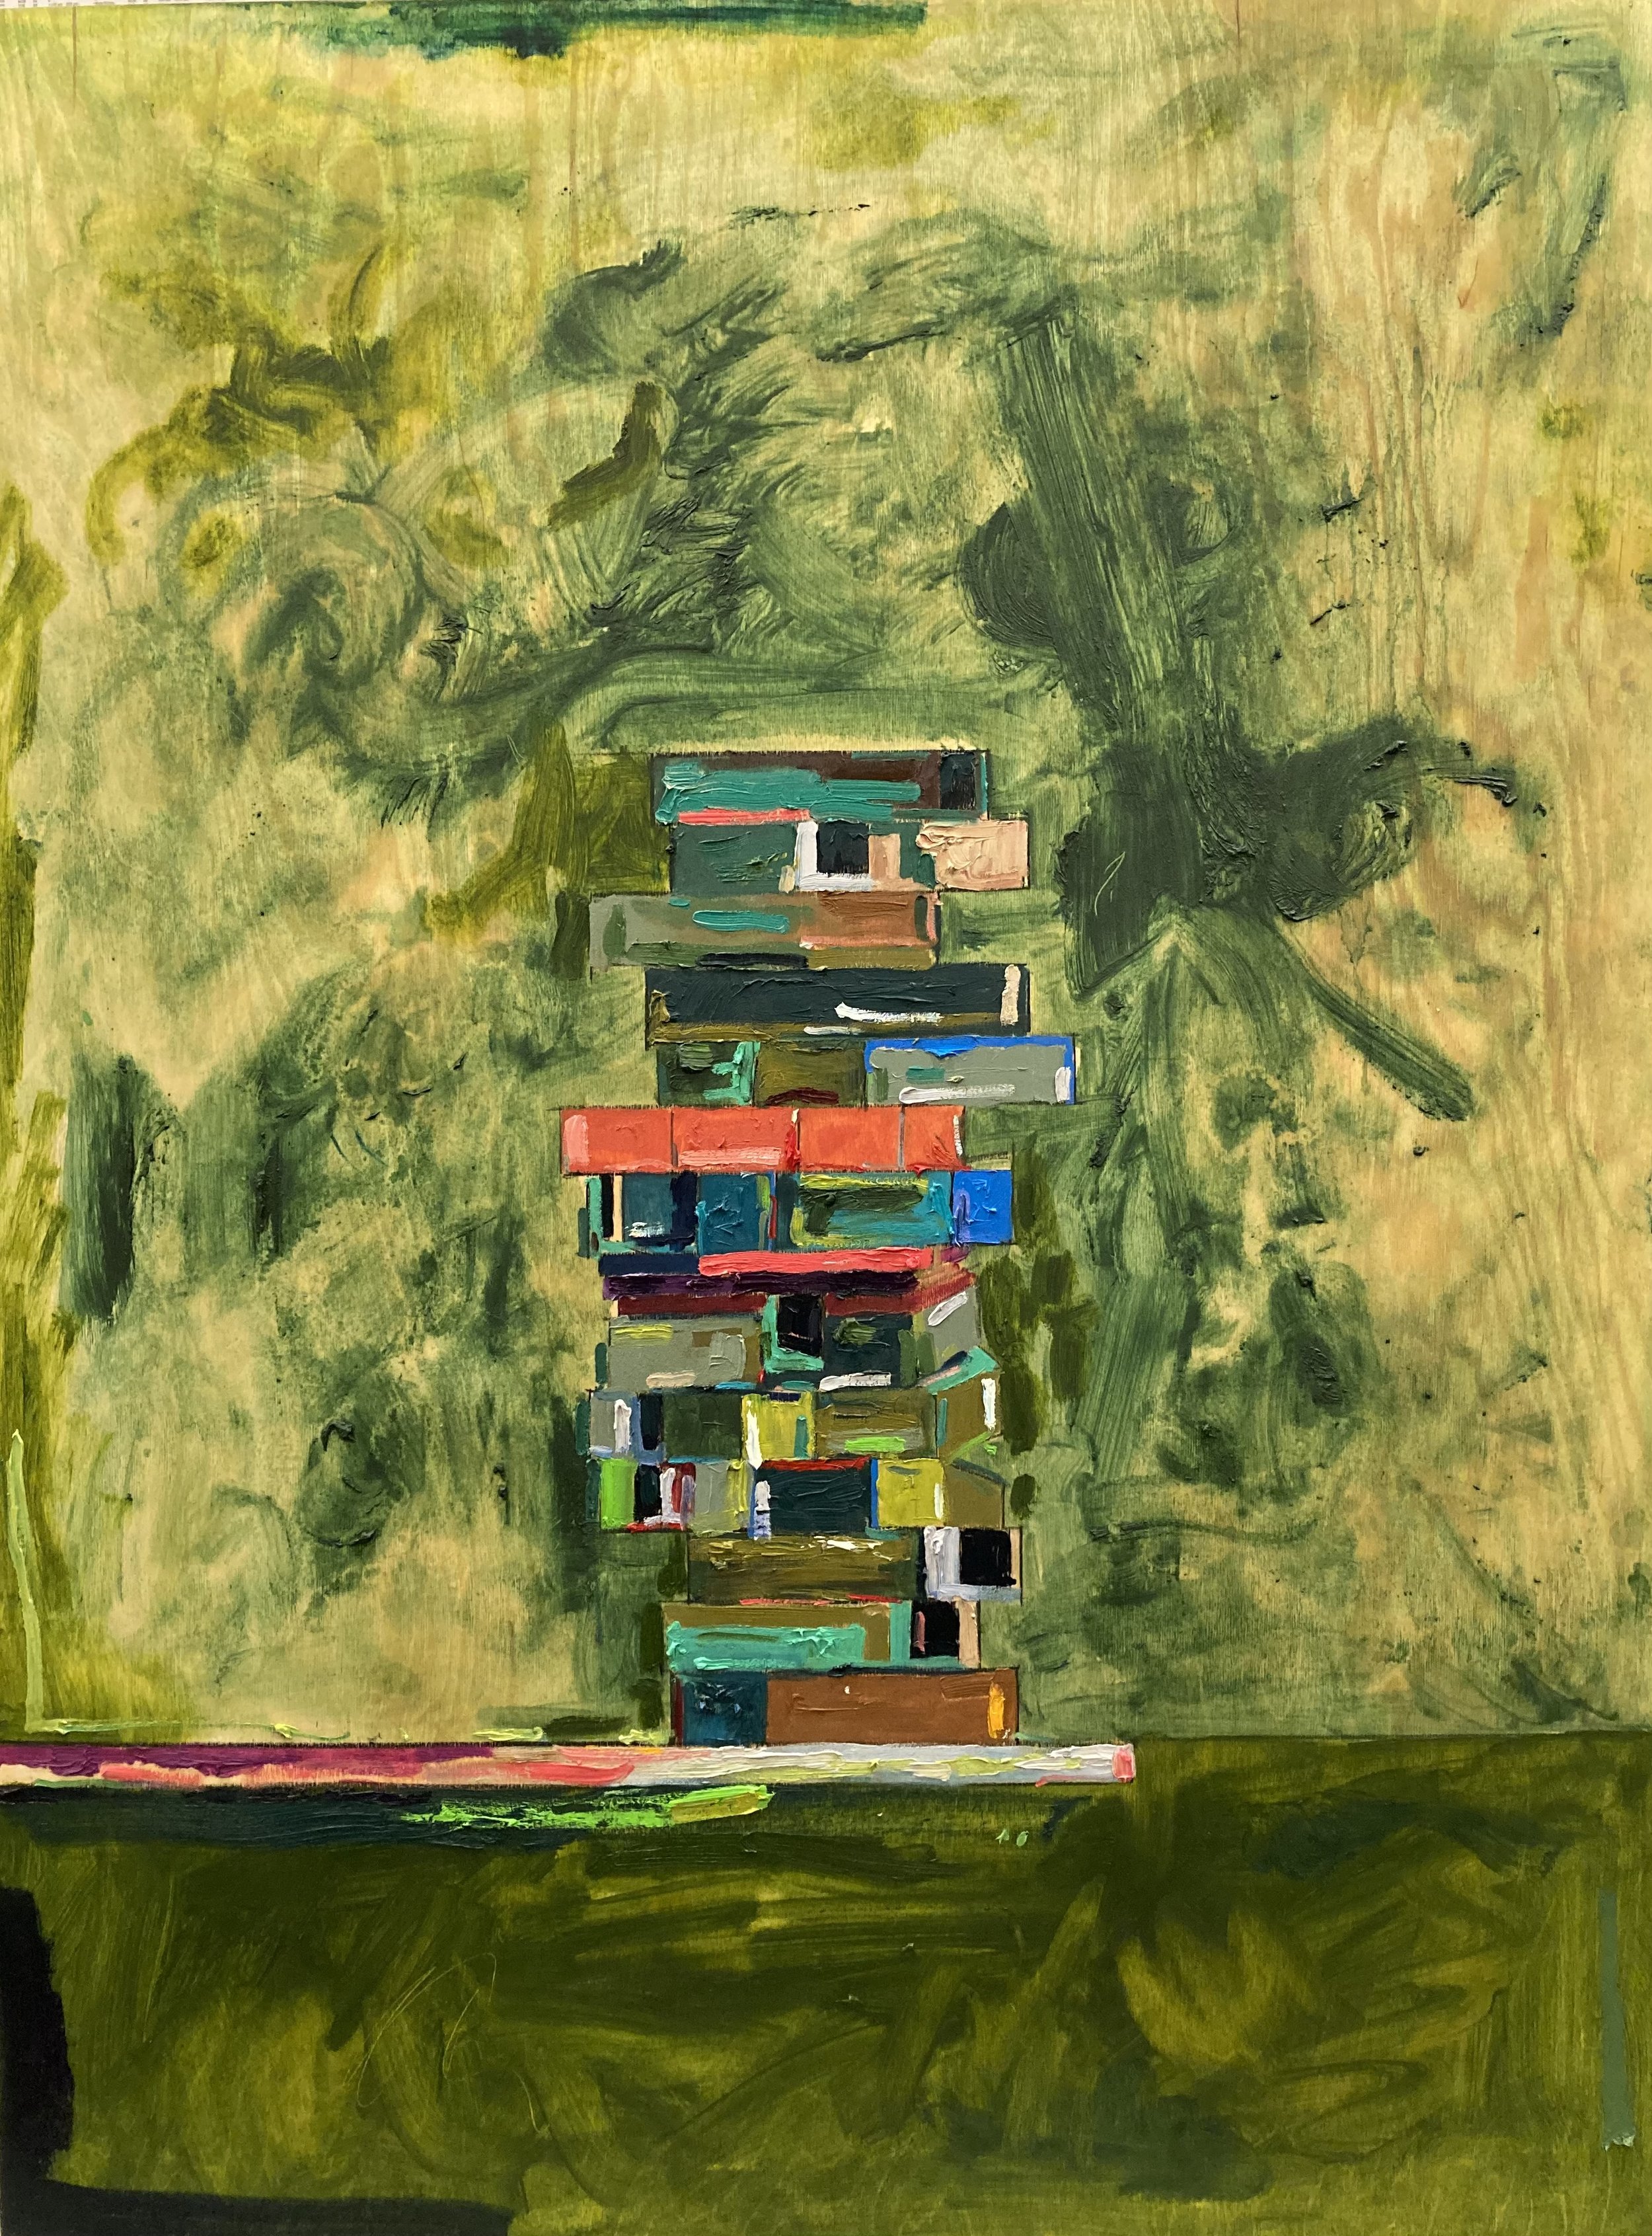 Green Living Escalation Party  2021  Oil on Panel  48 x 36 inches $3600 Available